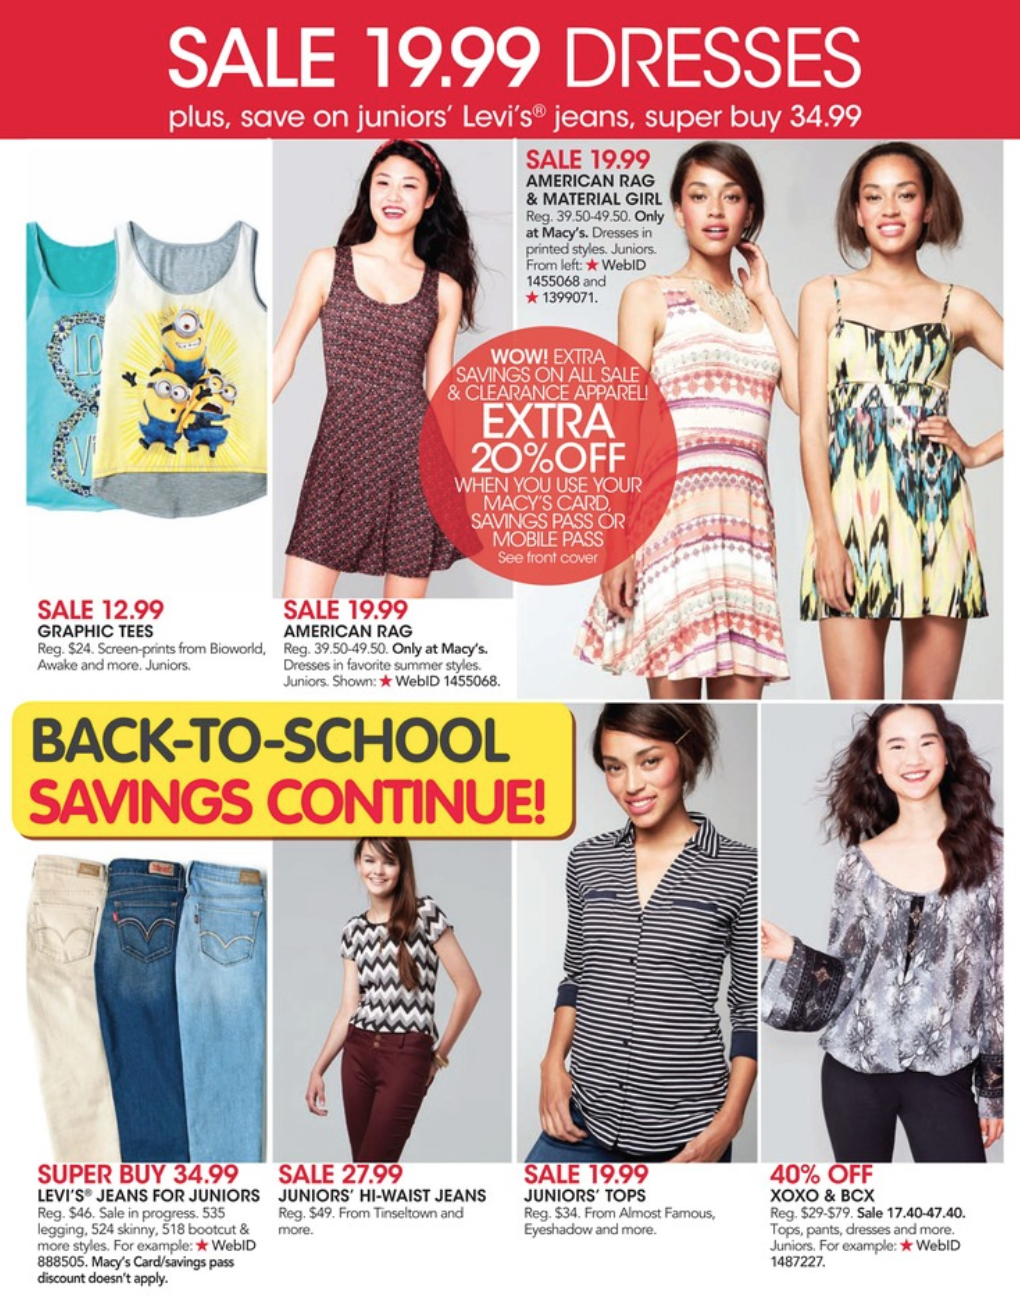 Macy’s 2015 Labor Day Weekend Sale & Coupons for the Best Deals | Black Friday 2015